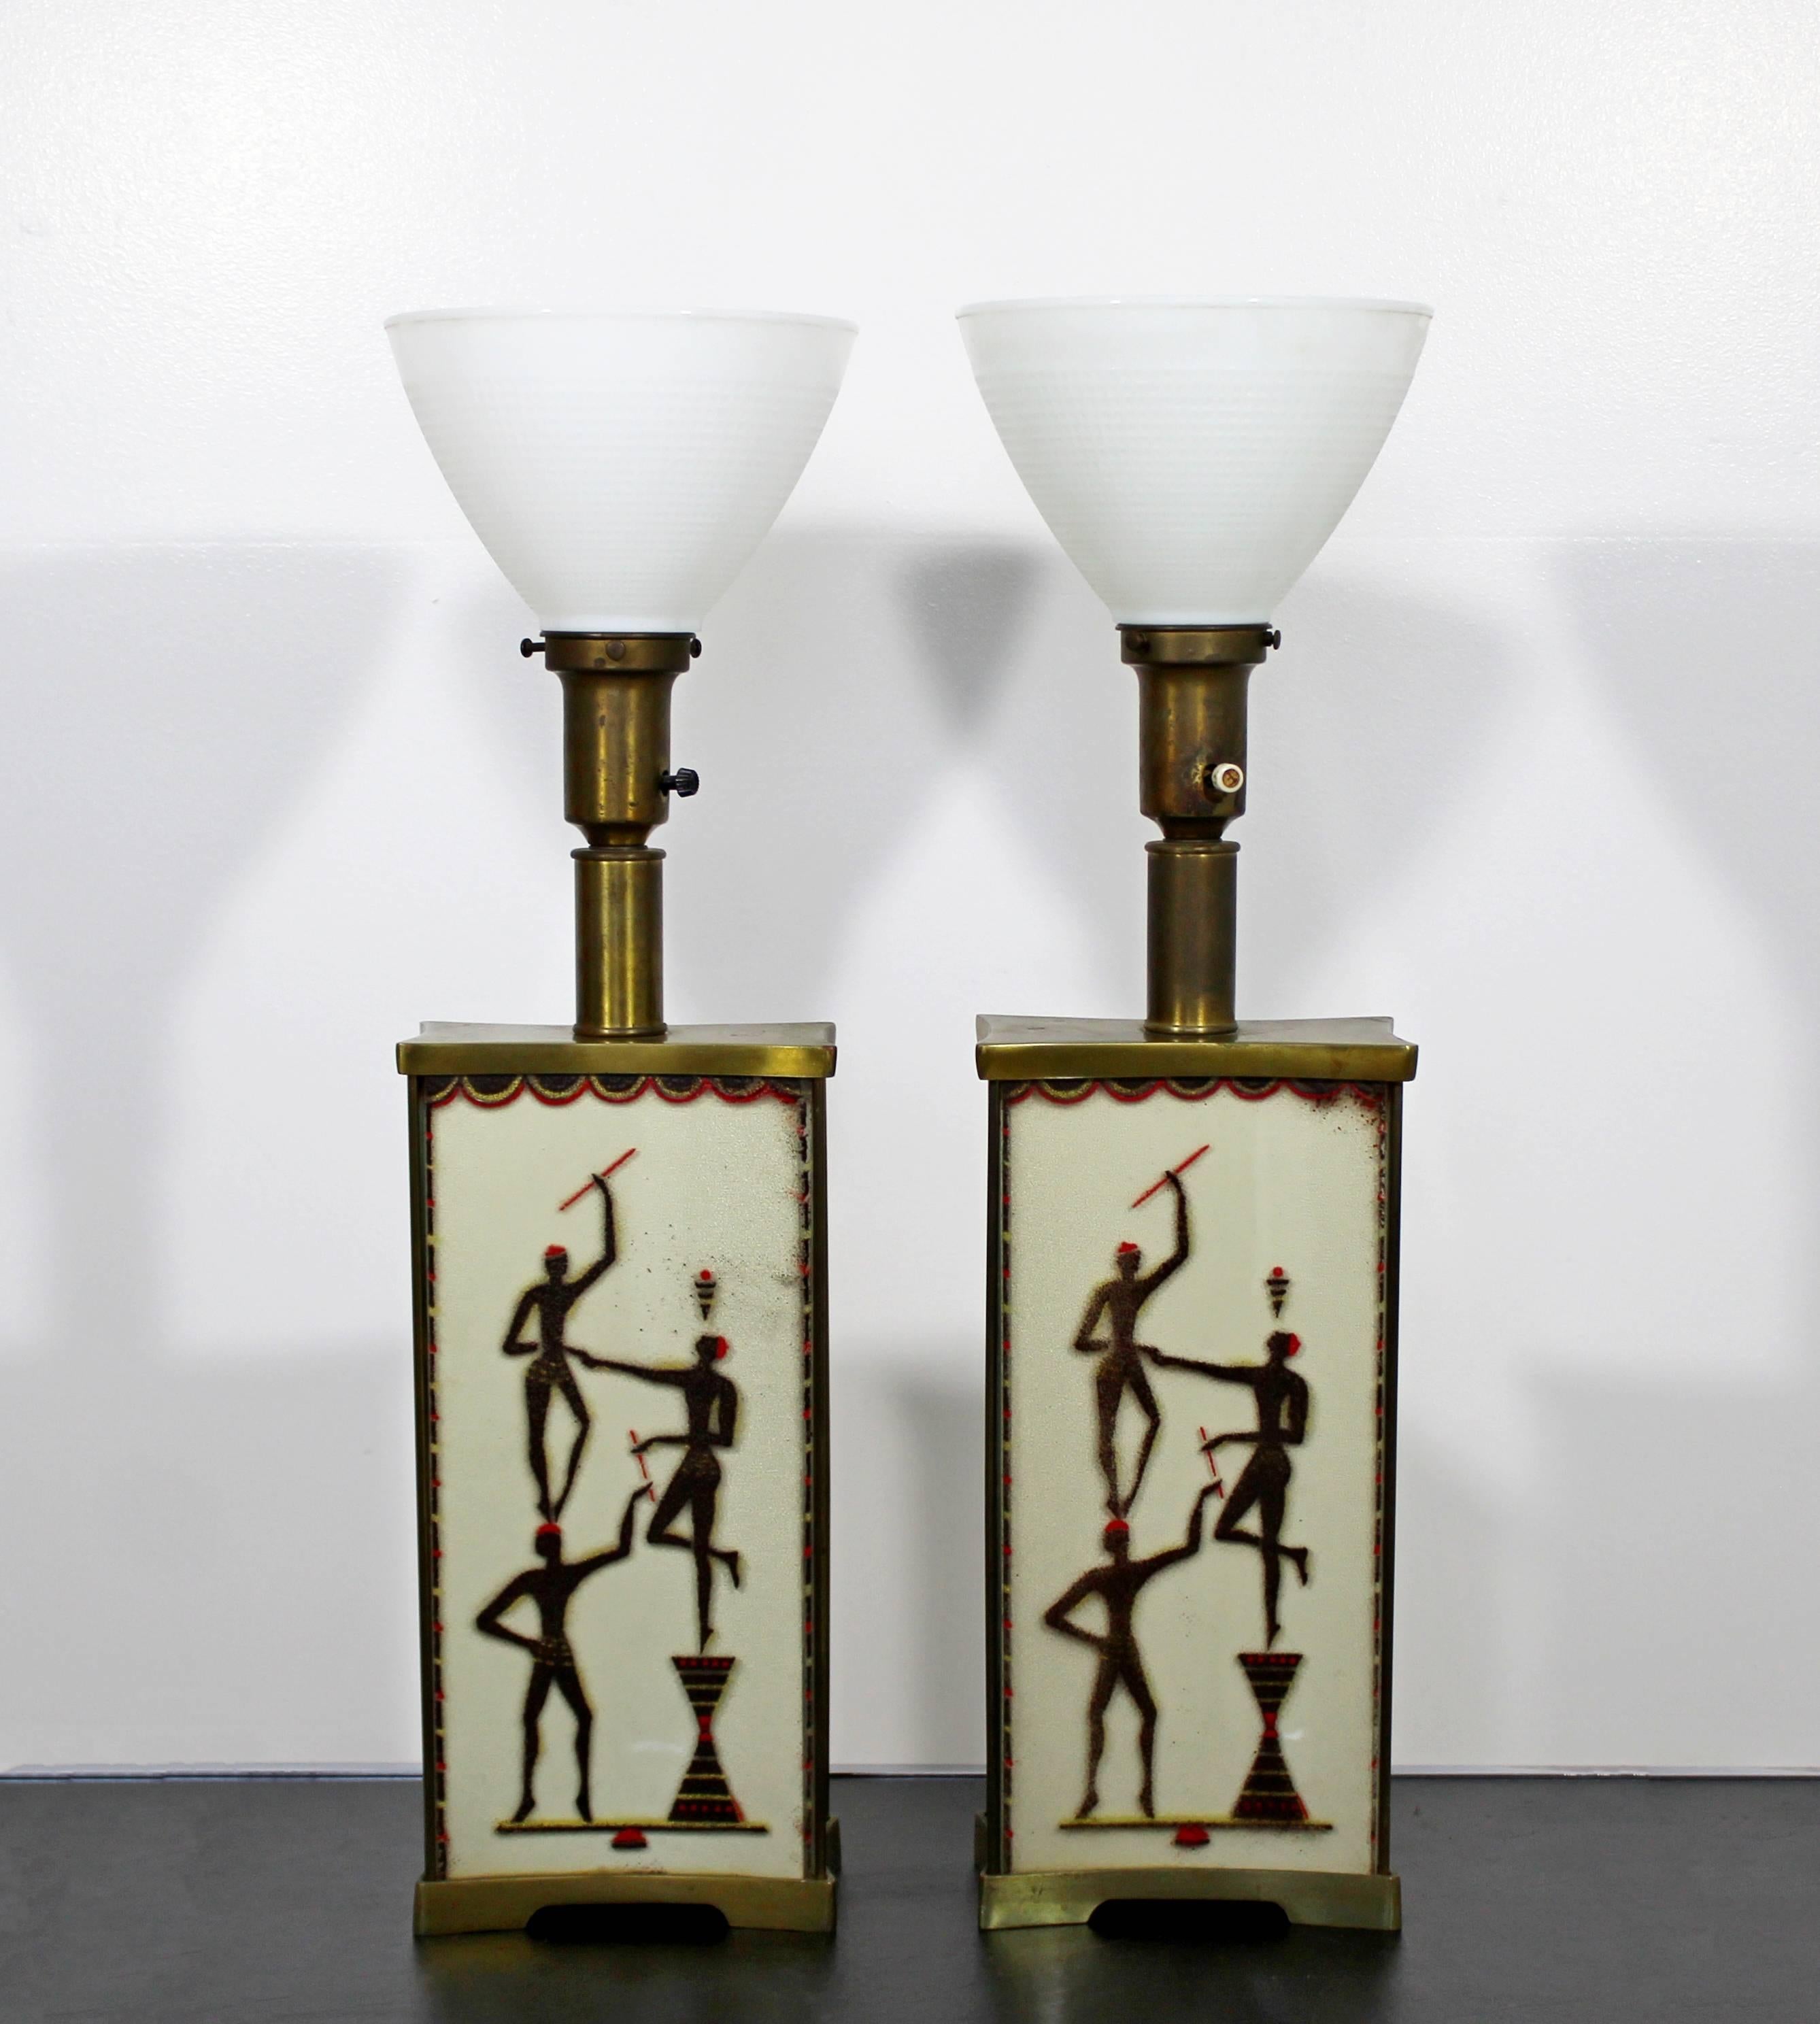 For your consideration is a magnificent, super rare pair of four glass panel, tribal table lamps, with their original glass reflectors, by Maurice Heaton. In excellent condition. The dimensions are 8